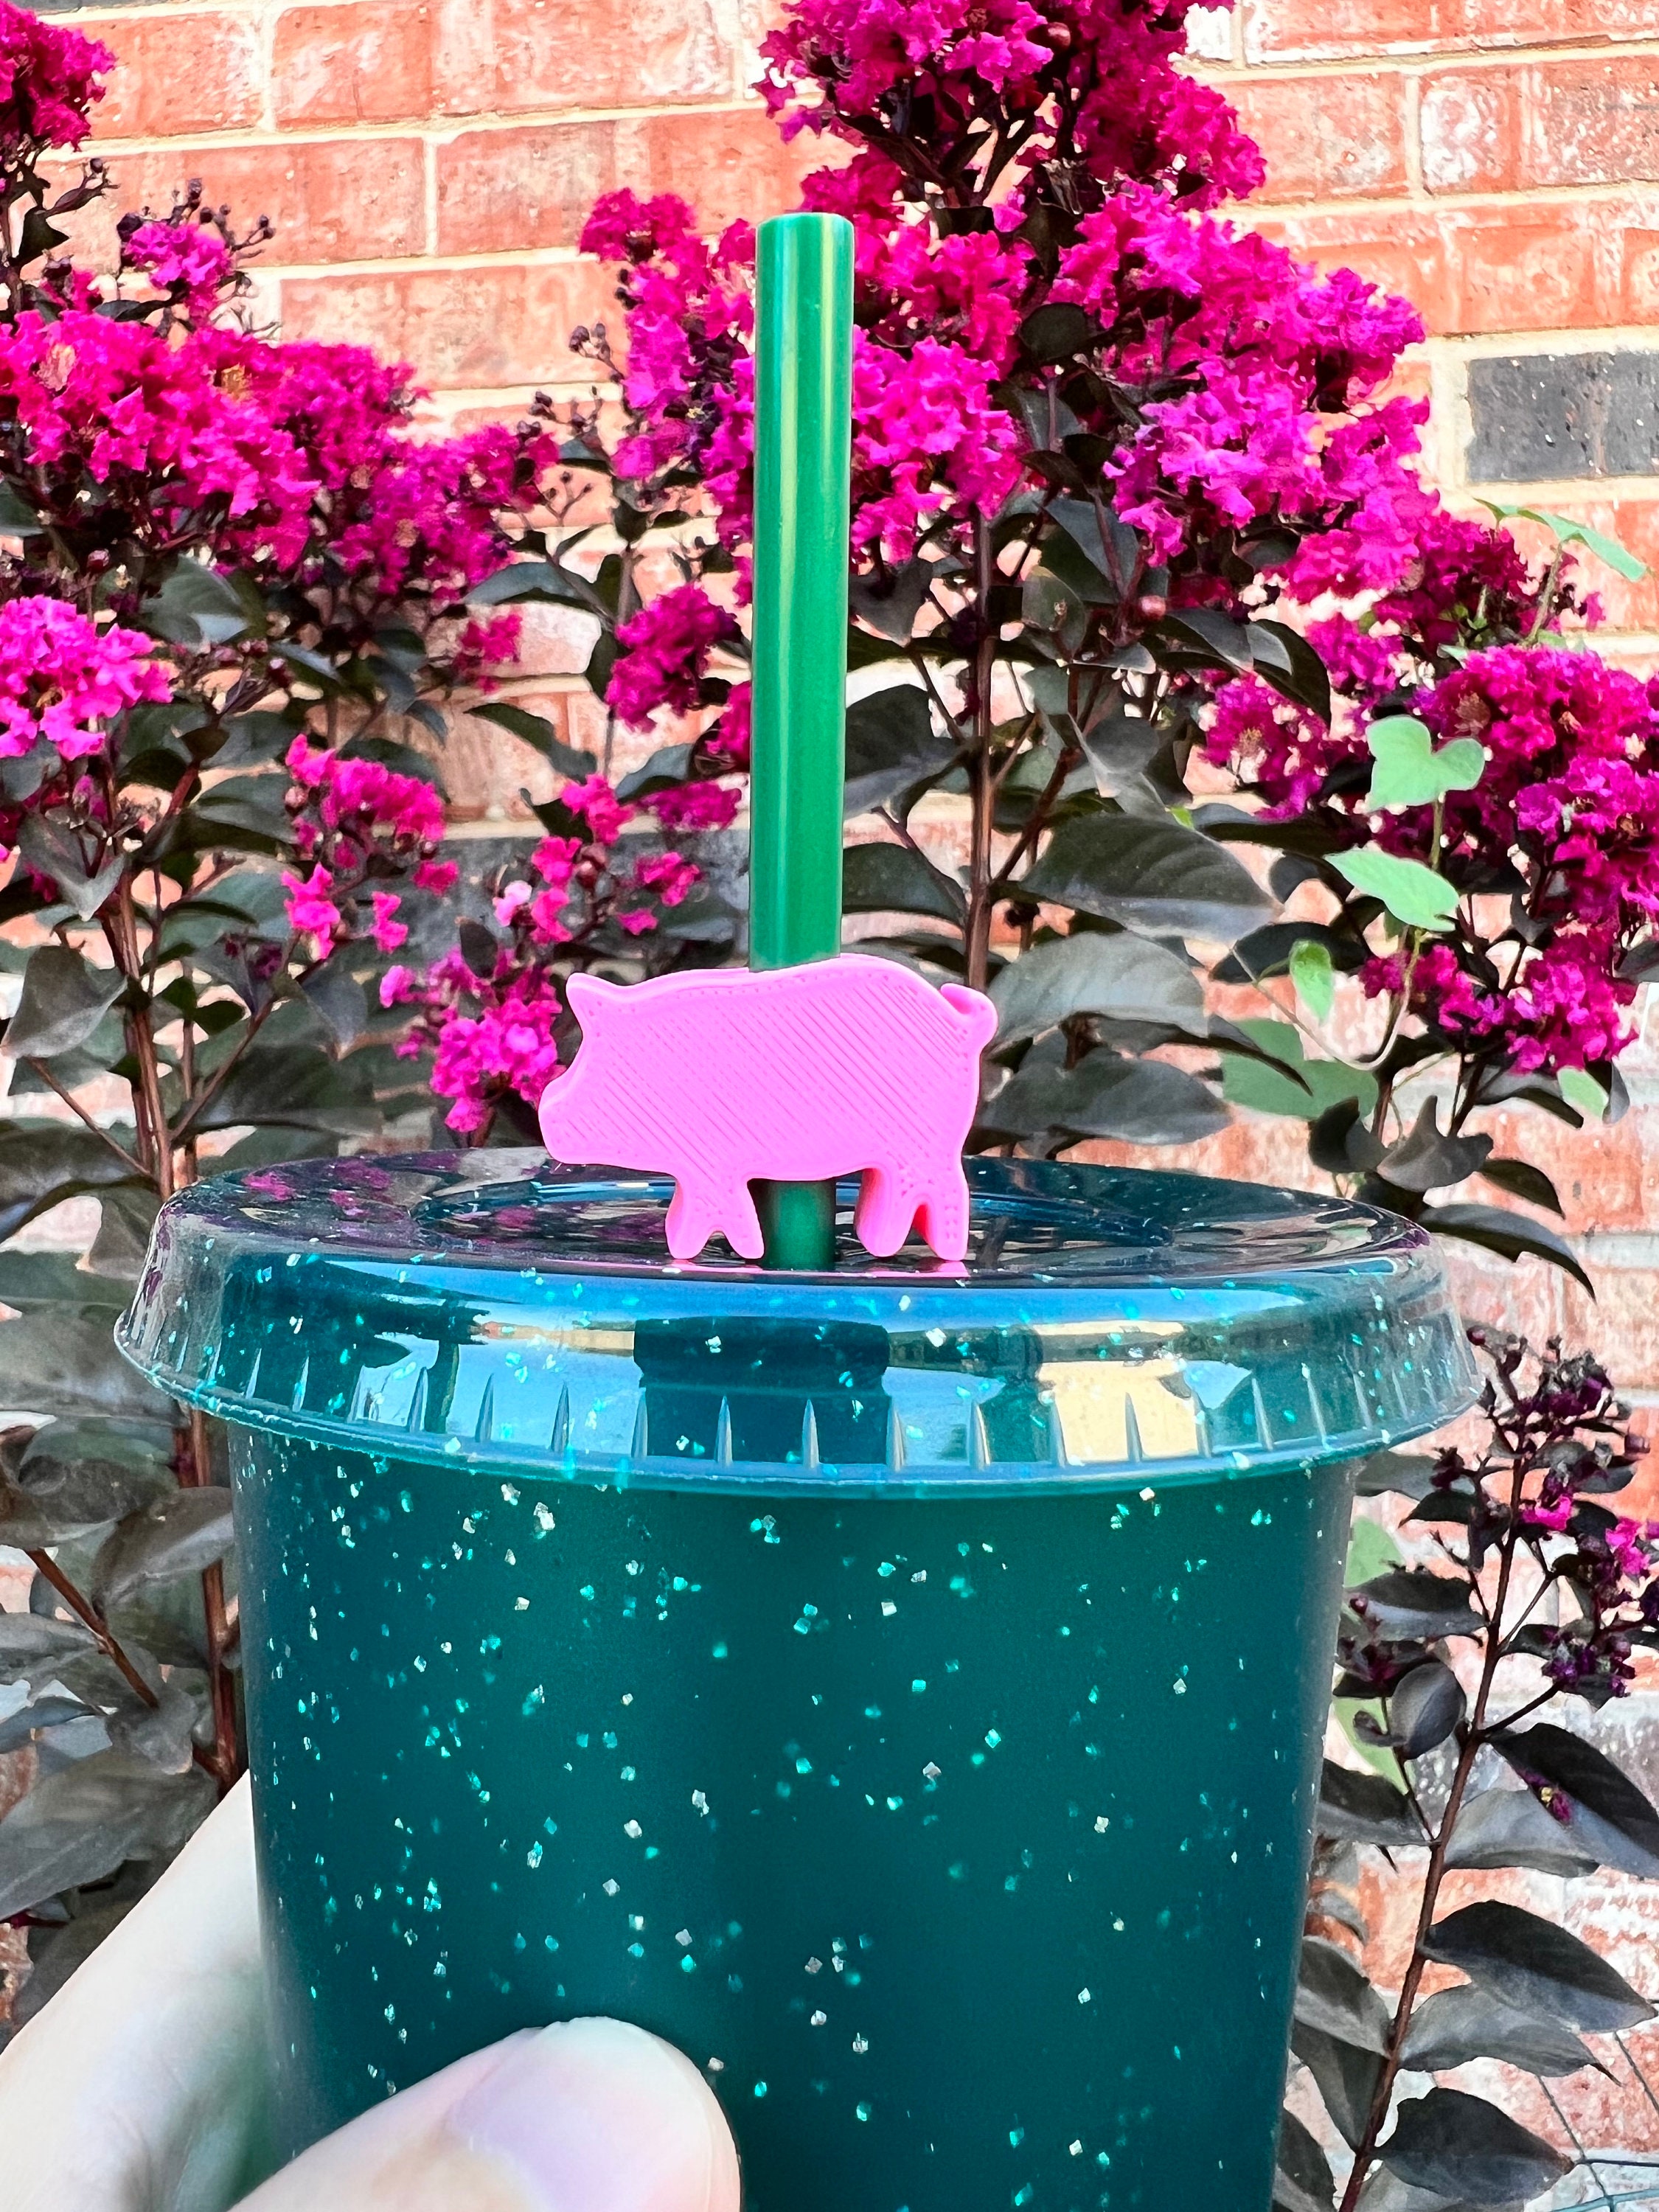 Cute Kitty Straw Topper – Etch and Ember